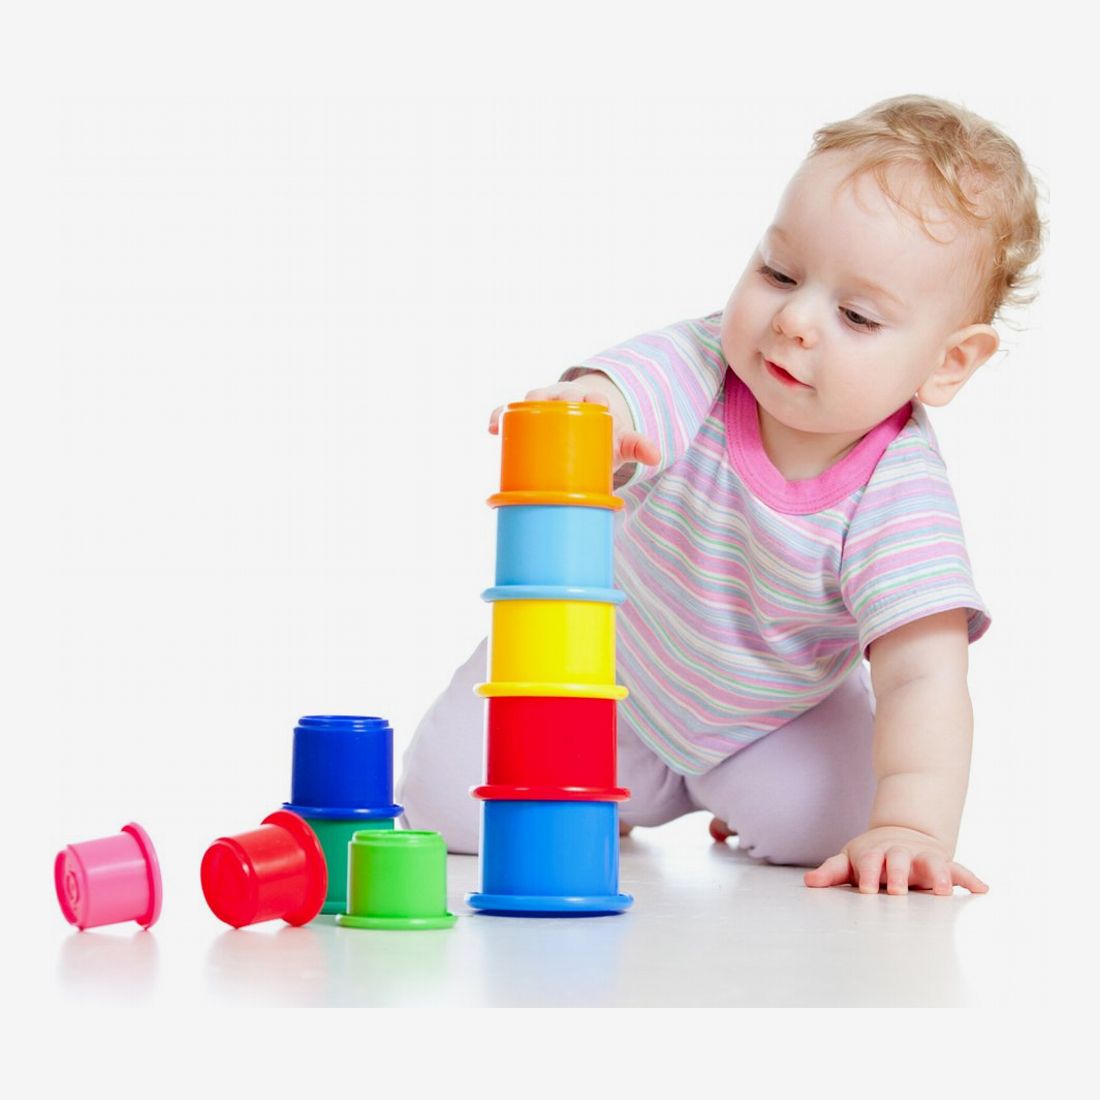 educational toys for babies 6 months